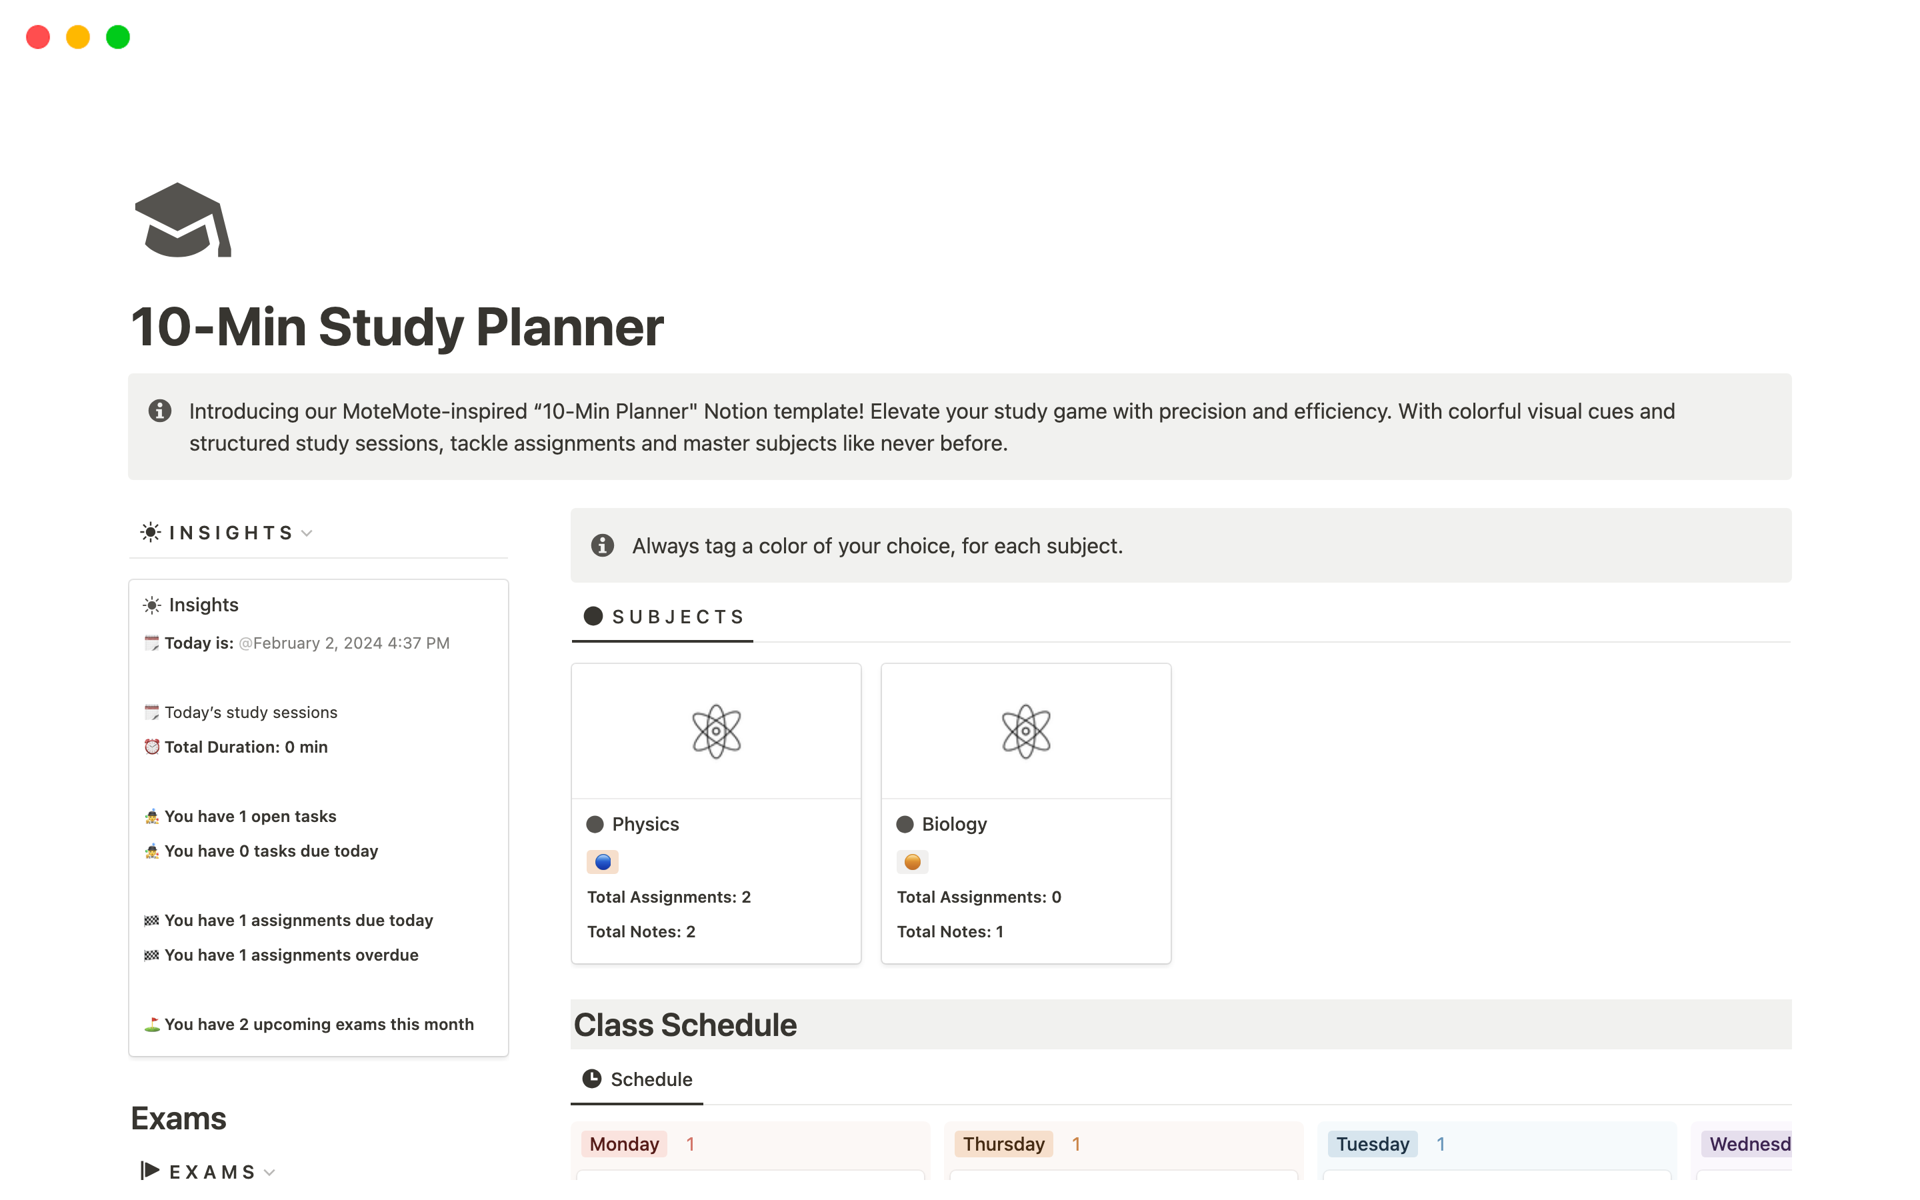 Introducing our MoteMote-inspired “10-Min Planner" Notion template! Elevate your study game with precision and efficiency. With colorful visual cues and structured study sessions, tackle assignments and master subjects like never before. 